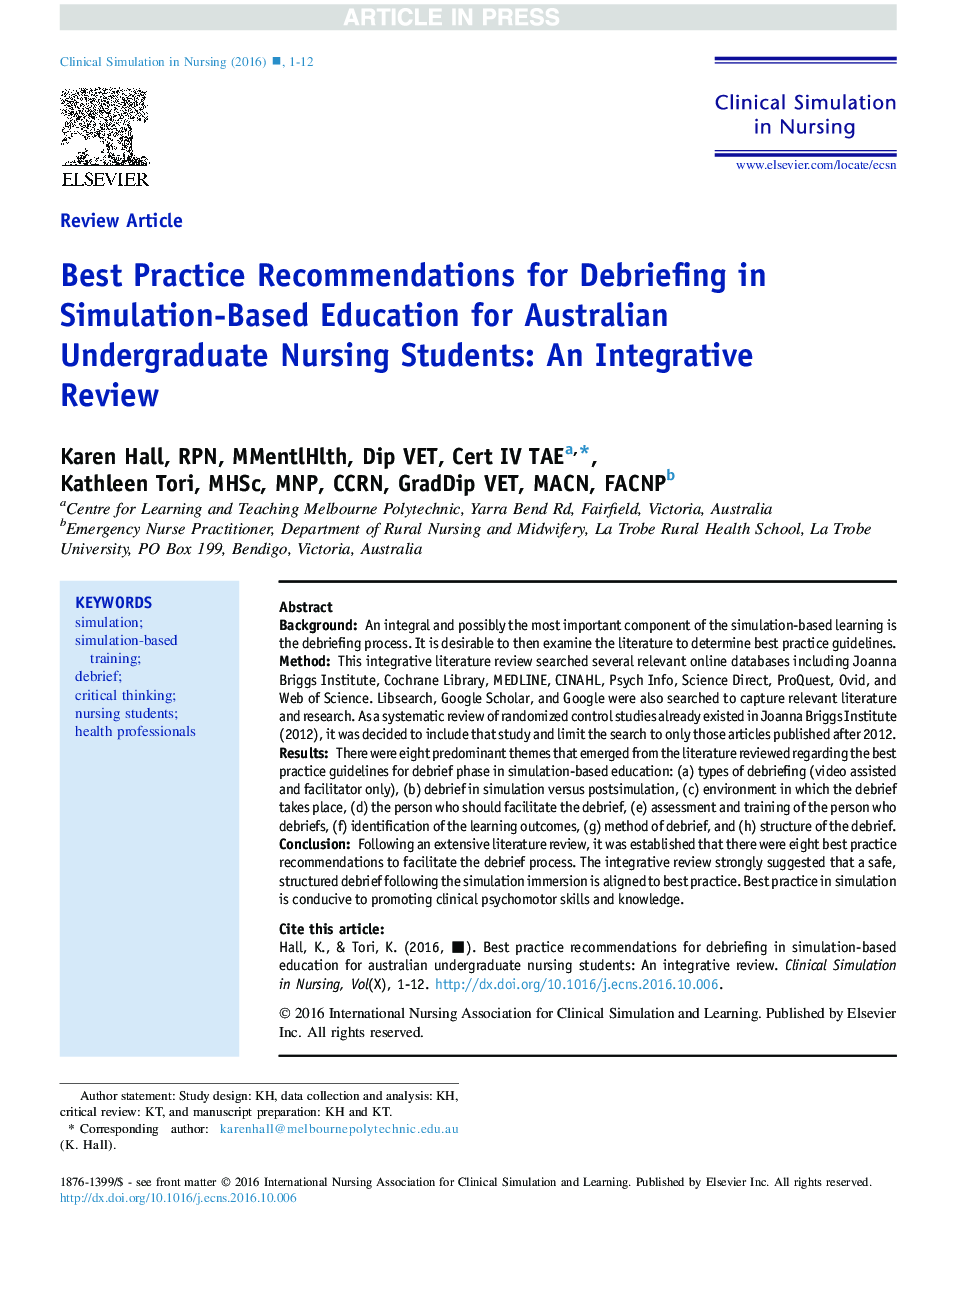 Best Practice Recommendations for Debriefing in Simulation-Based Education for Australian Undergraduate Nursing Students: An Integrative Review